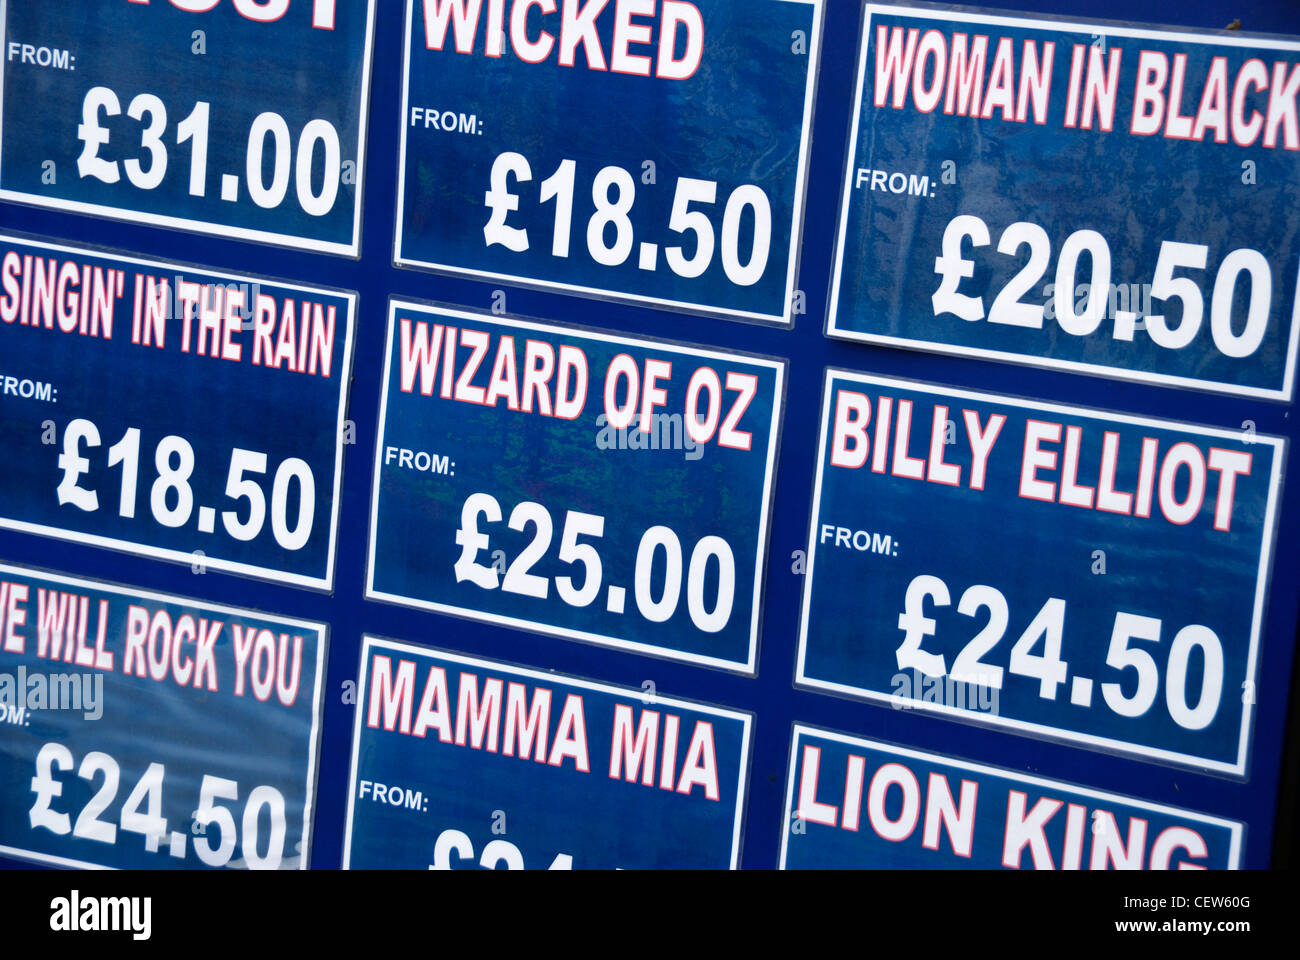 London West End theatre ticket prices Stock Photo